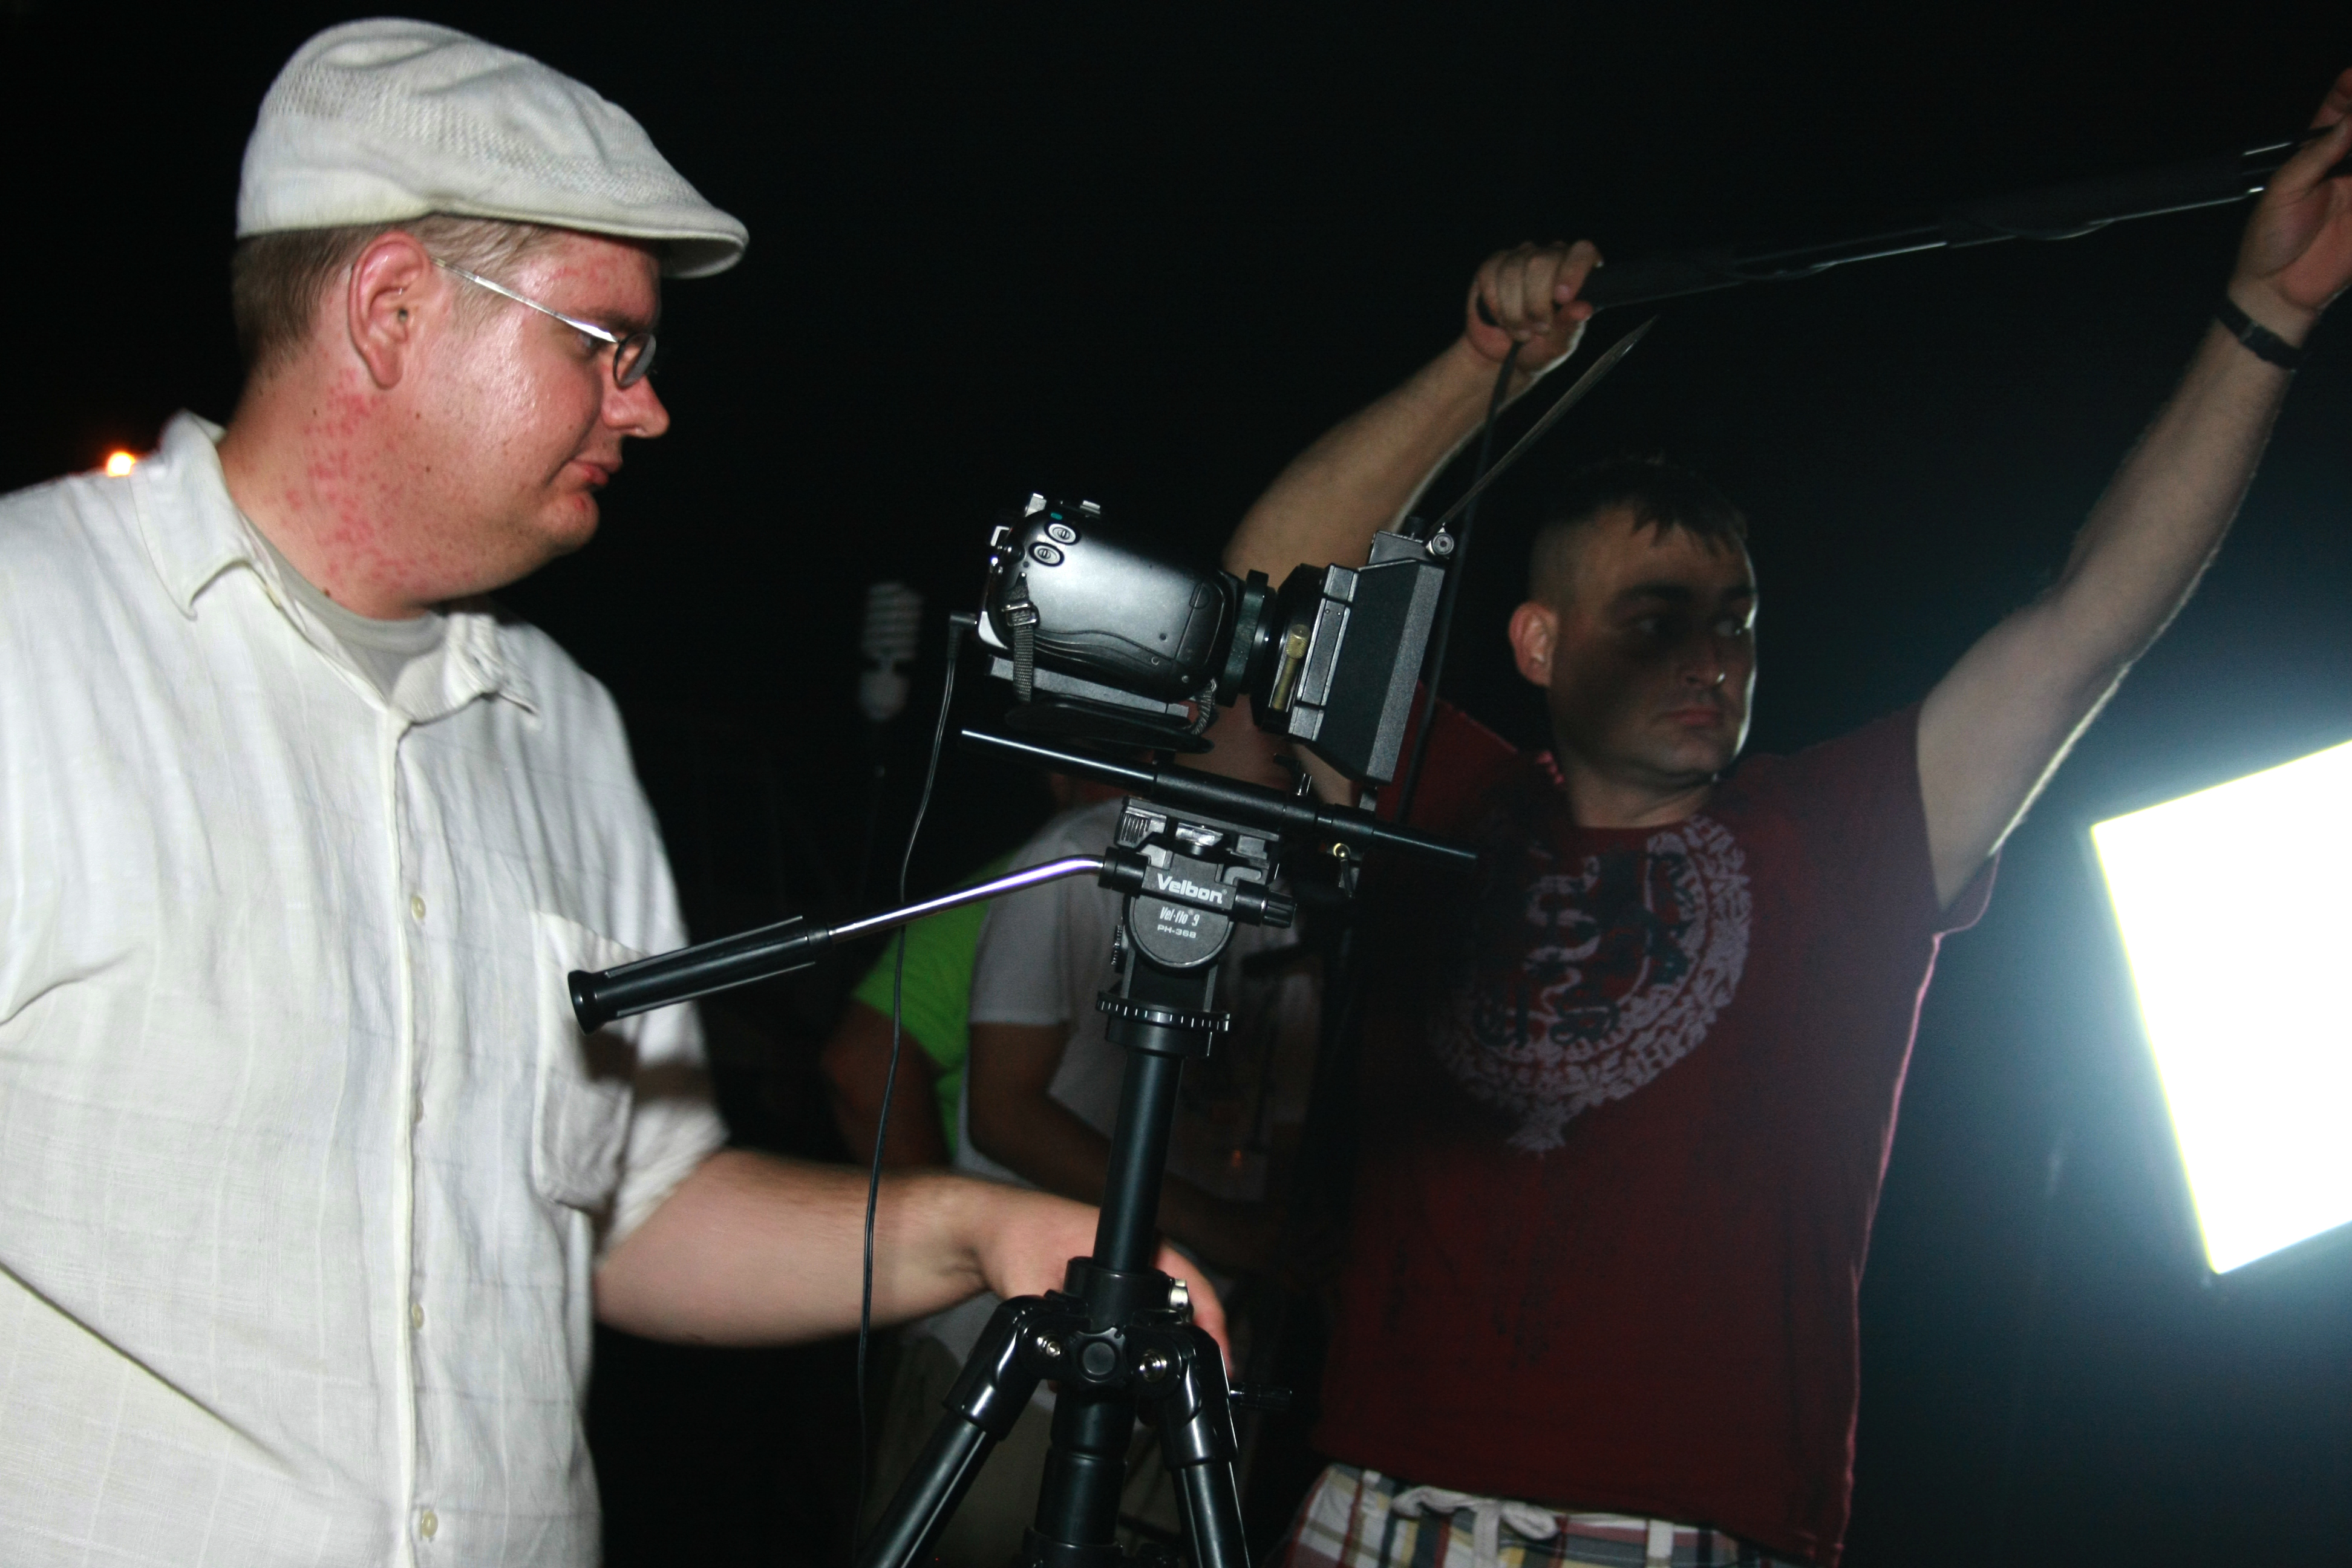 Doug Cole (Camera) and Stephen Dixon (boom mic) on the set of Exit 101 at the Halloween Party Scene.